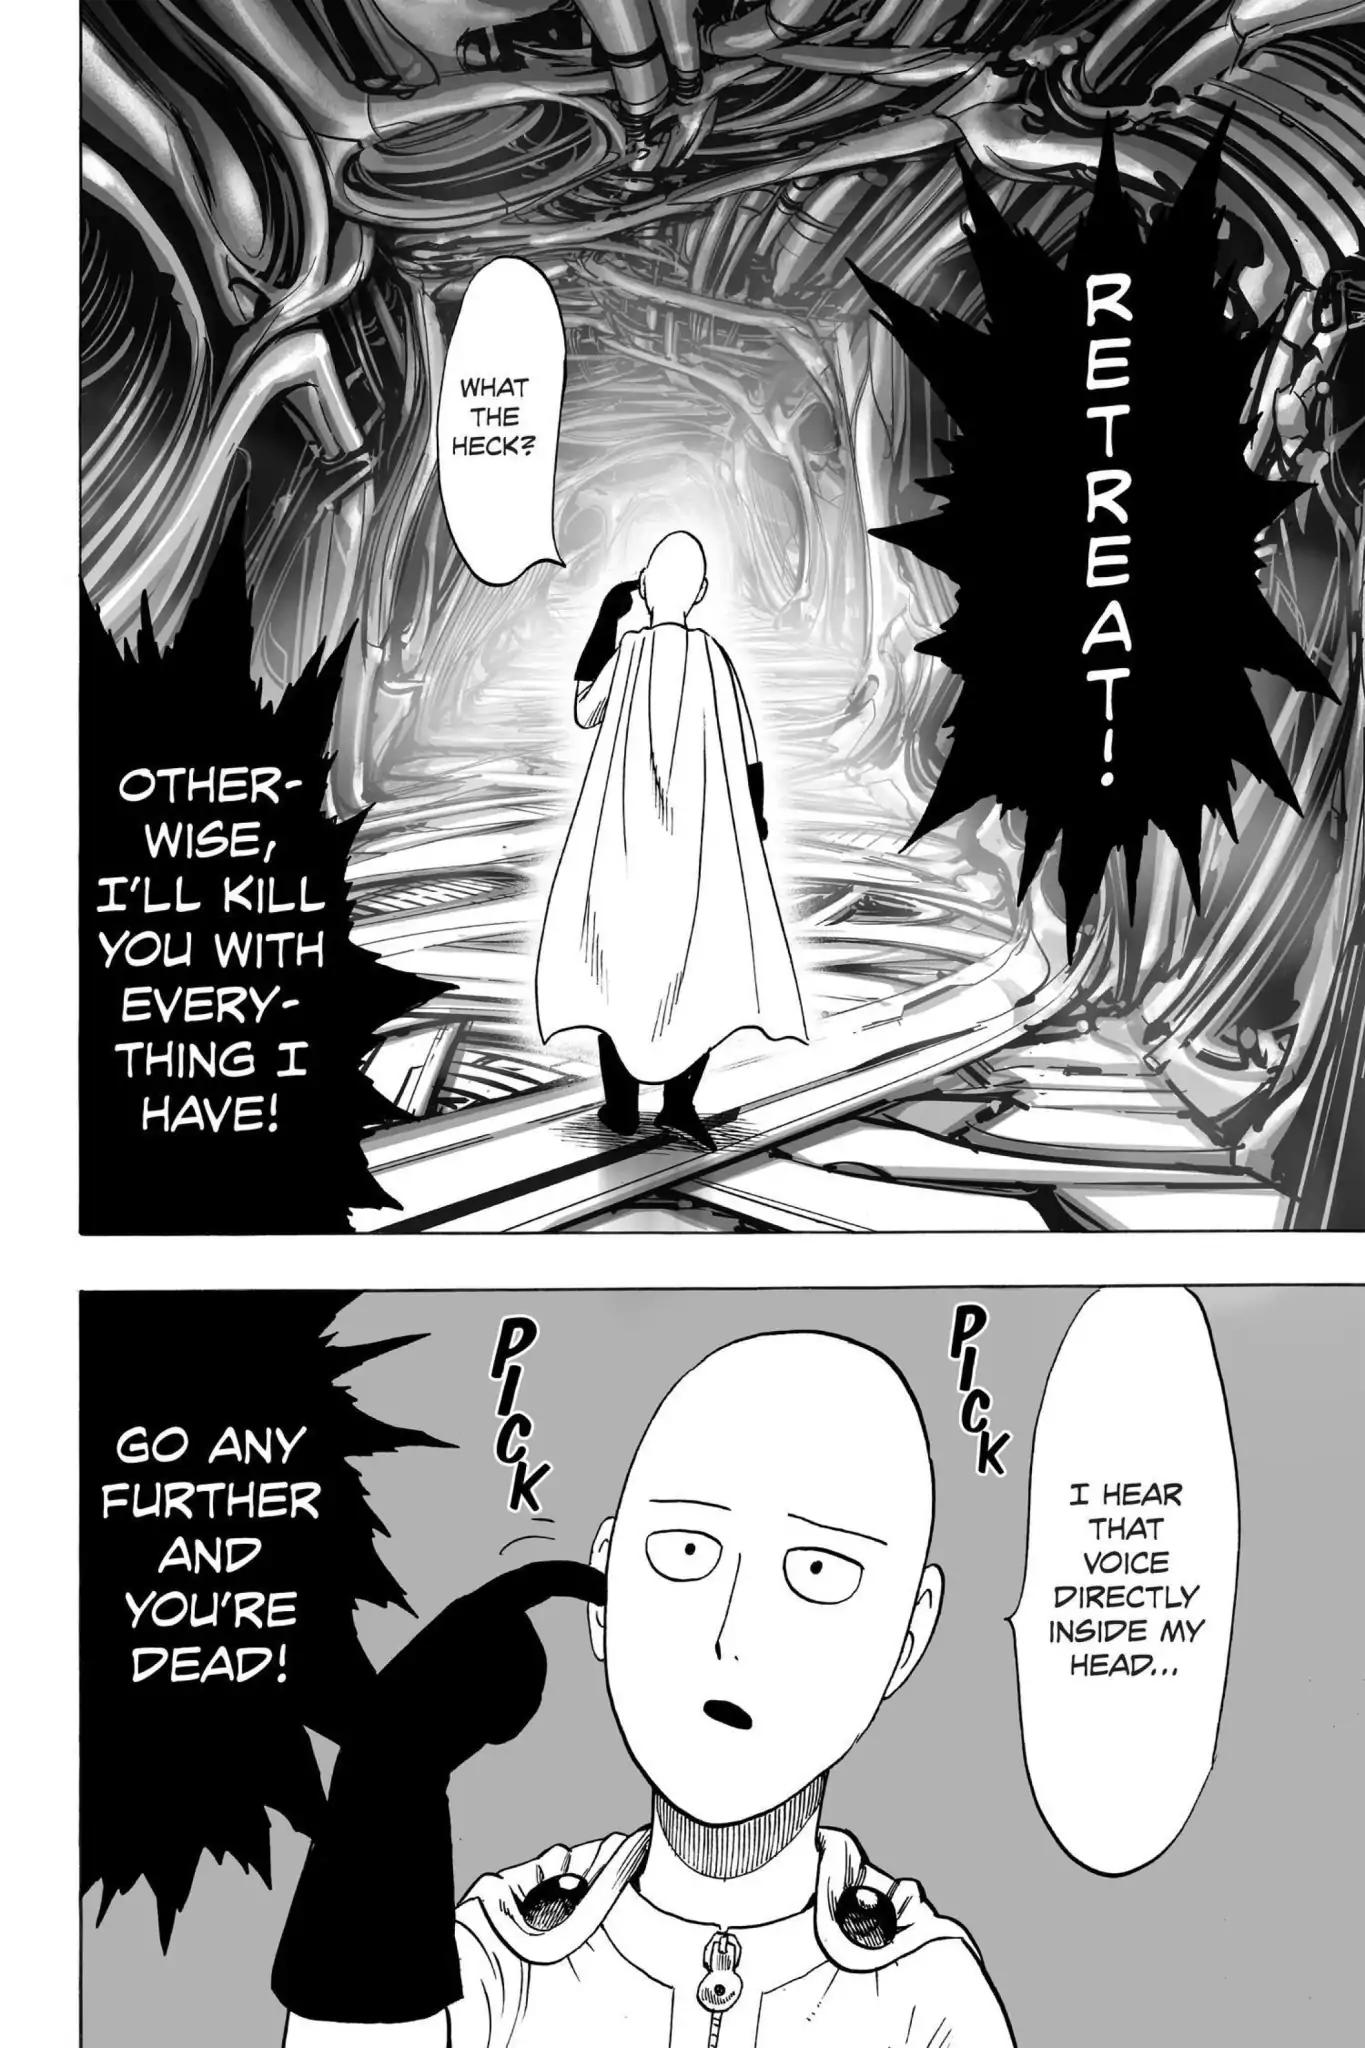 One-Punch Man chapter 33 page 16